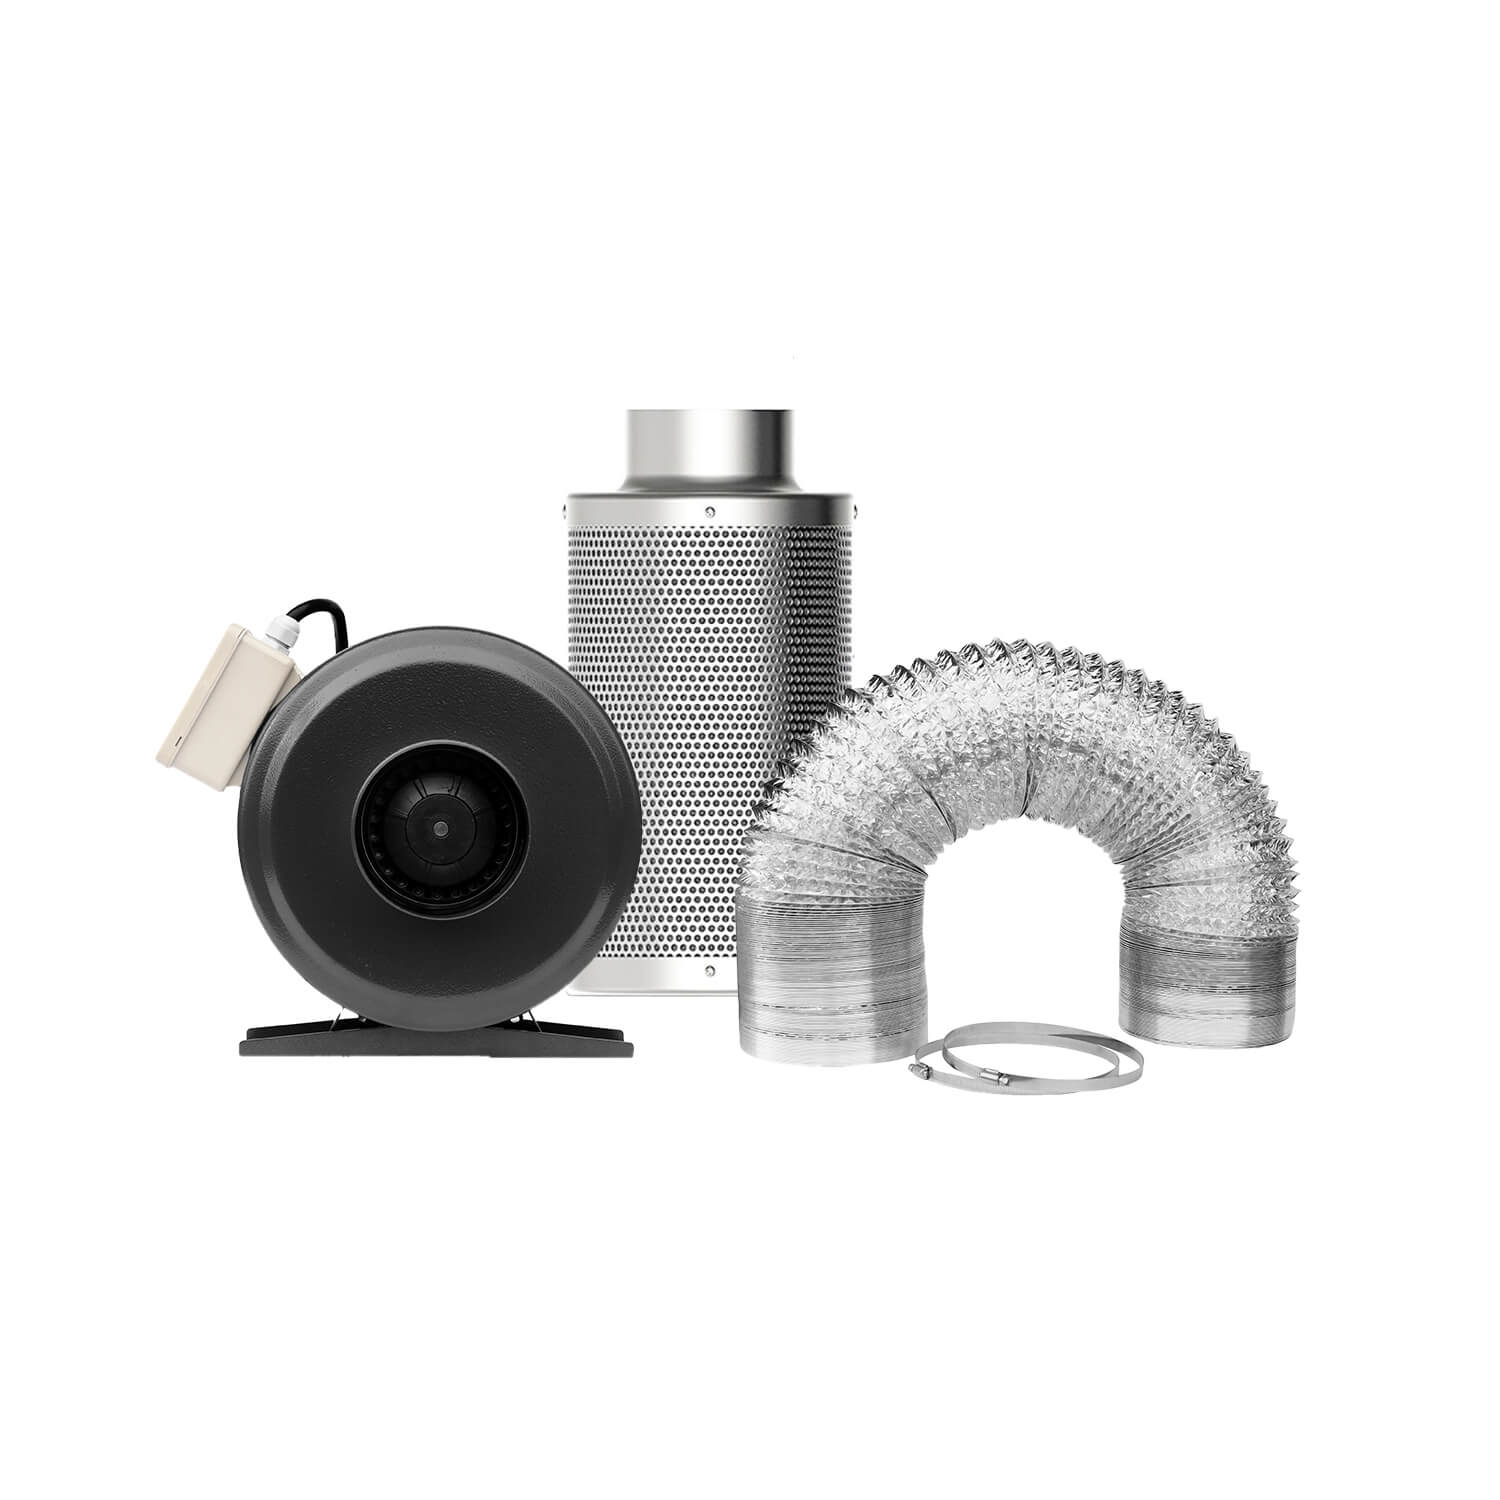 SunStream Inline Fan, Carbon Filter and Ducting Combo for Grow Tent Ventilation